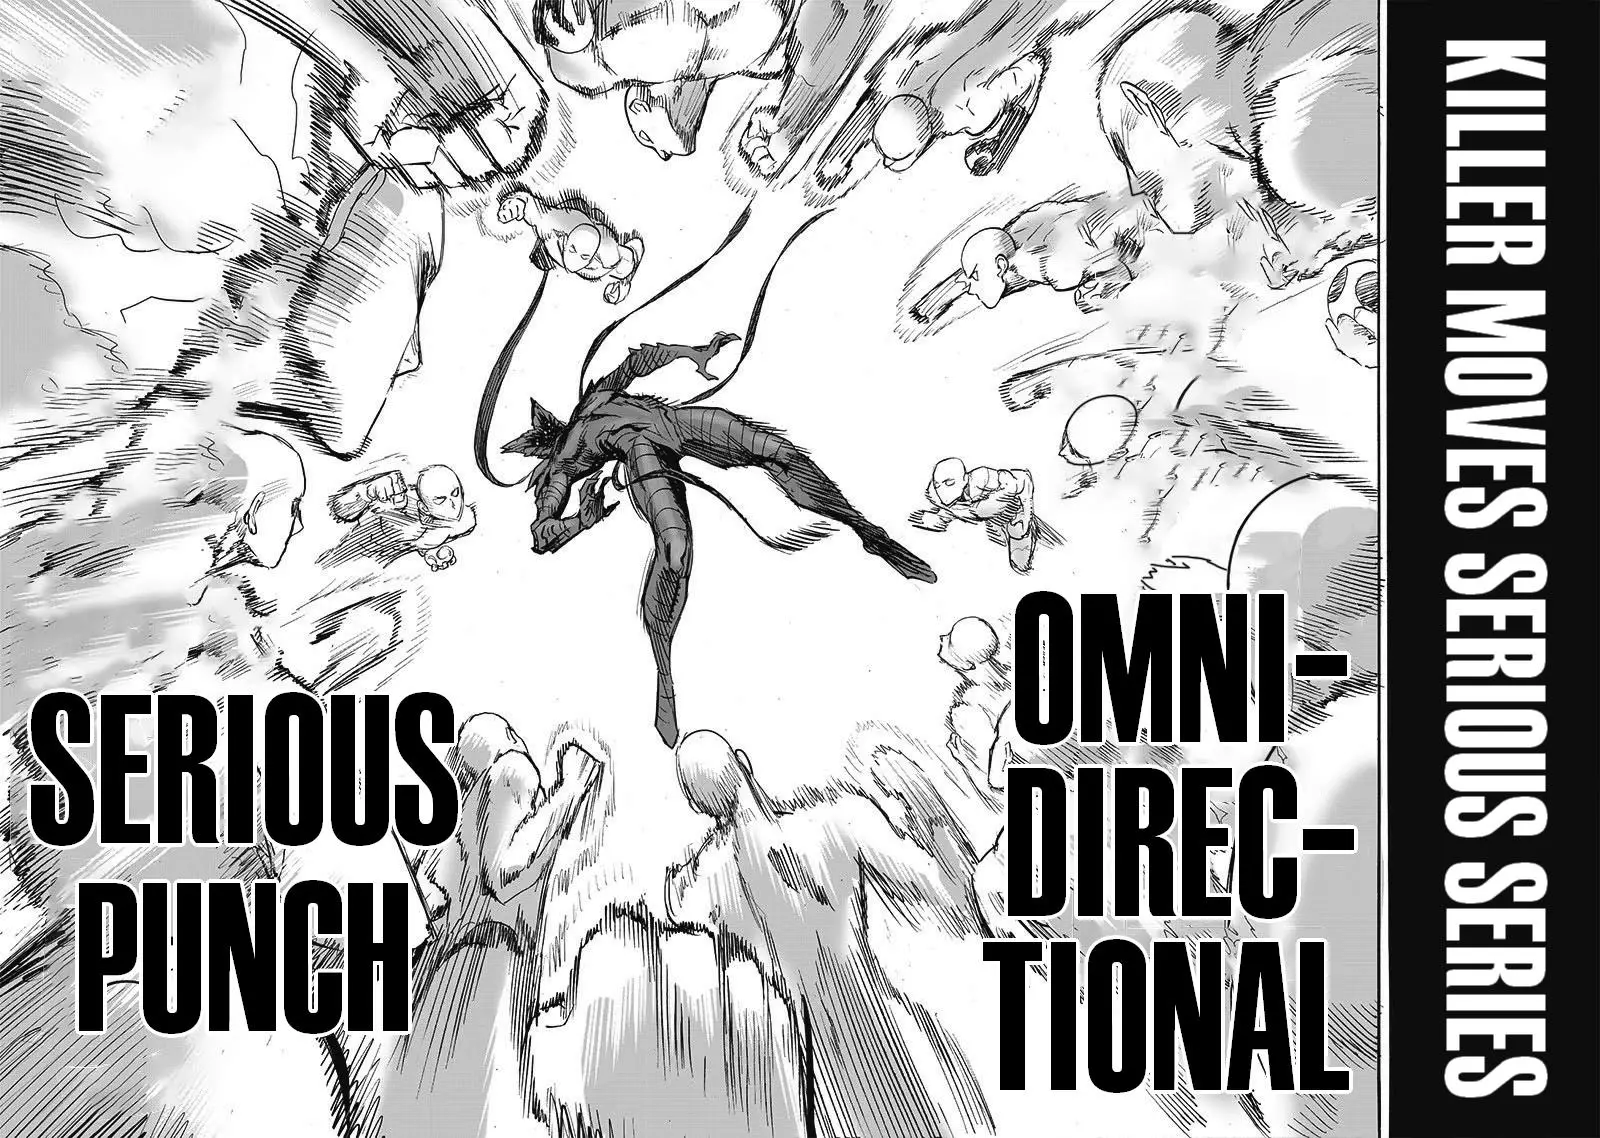 One Punch Man Chapter 167, READ One Punch Man Chapter 167 ONLINE, lost in the cloud genre,lost in the cloud gif,lost in the cloud girl,lost in the cloud goods,lost in the cloud goodreads,lost in the cloud,lost ark cloud gaming,lost odyssey cloud gaming,lost in the cloud fanart,lost in the cloud fanfic,lost in the cloud fandom,lost in the cloud first kiss,lost in the cloud font,lost in the cloud ending,lost in the cloud episode 97,lost in the cloud edit,lost in the cloud explained,lost in the cloud dog,lost in the cloud discord server,lost in the cloud desktop wallpaper,lost in the cloud drawing,can't find my cloud on network,lost in the cloud characters,lost in the cloud chapter 93 release date,lost in the cloud birthday,lost in the cloud birthday art,lost in the cloud background,lost in the cloud banner,lost in the clouds meaning,what is the black cloud in lost,lost in the cloud ao3,lost in the cloud anime,lost in the cloud art,lost in the cloud author twitter,lost in the cloud author instagram,lost in the cloud artist,lost in the cloud acrylic stand,lost in the cloud artist twitter,lost in the cloud art style,lost in the cloud analysis